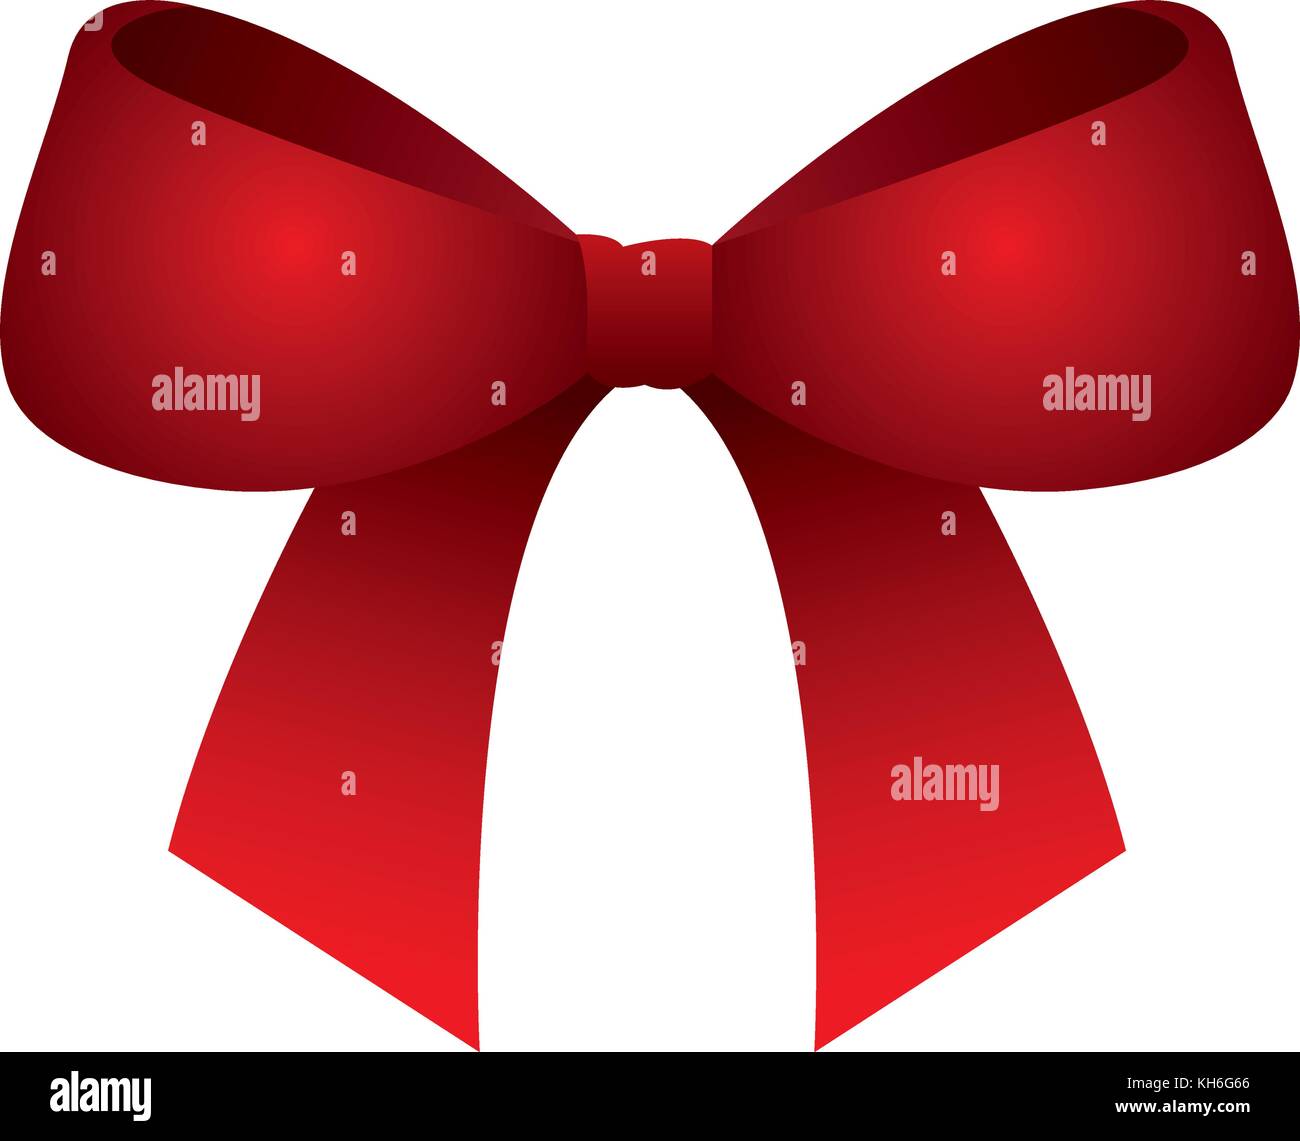 Adorable pink double ribbon bow design element Vector Image